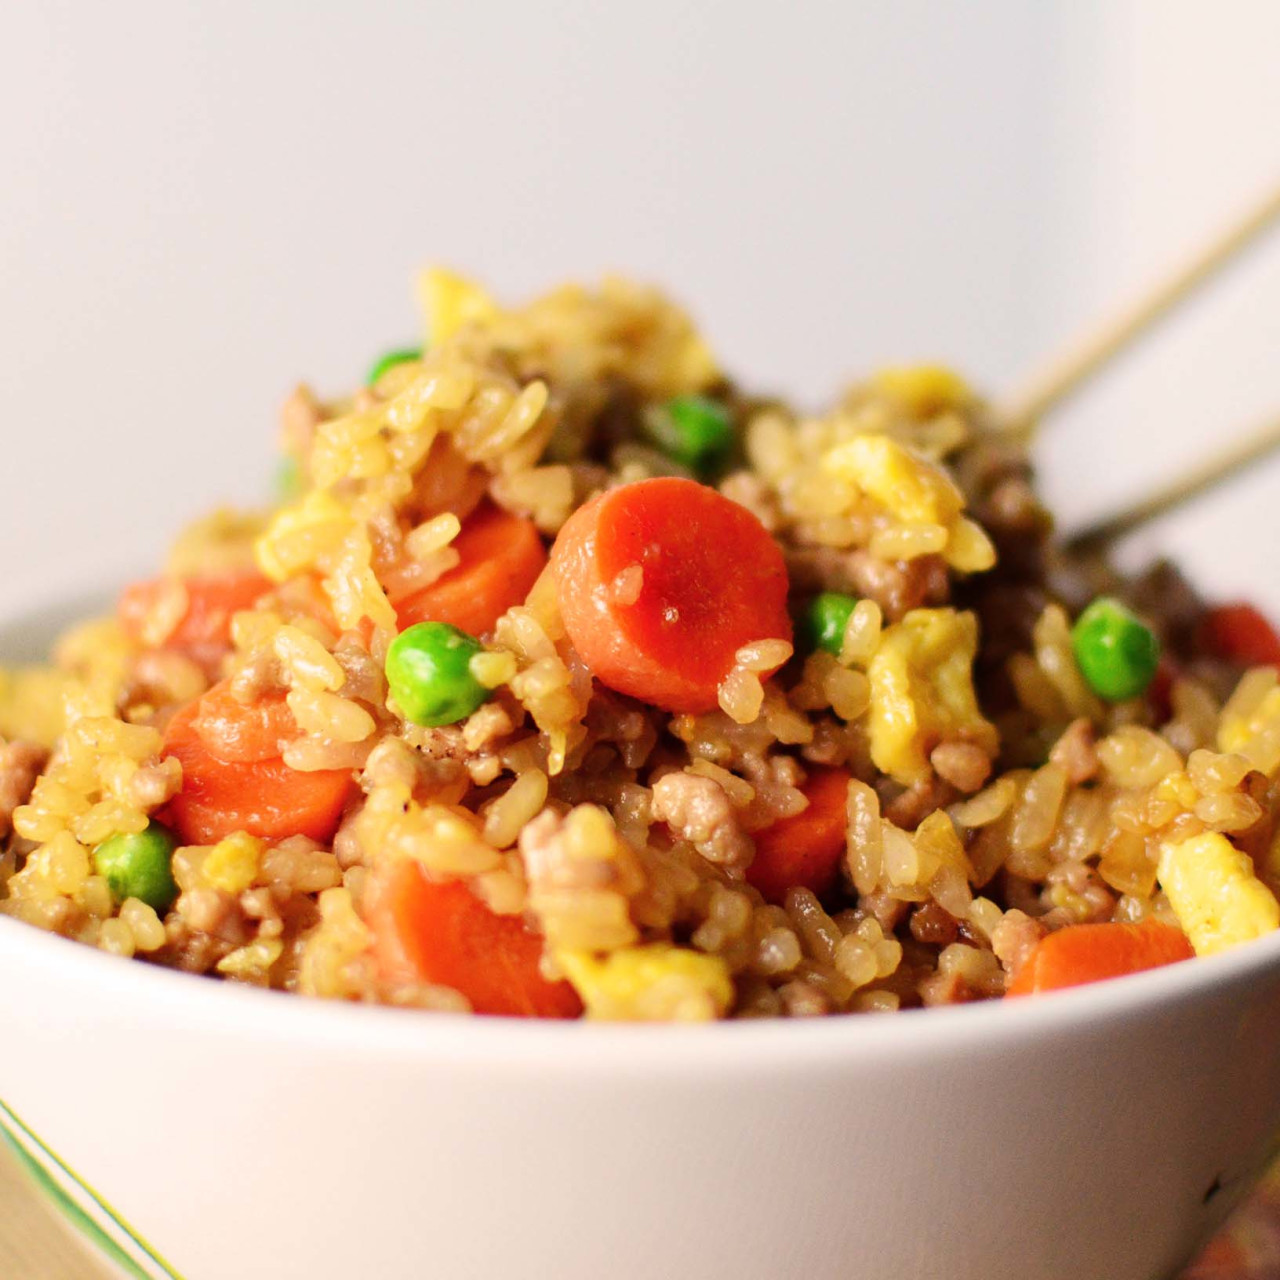 https://bigoven-res.cloudinary.com/image/upload/t_recipe-1280/sweet-and-savory-fried-rice-506d94.jpg